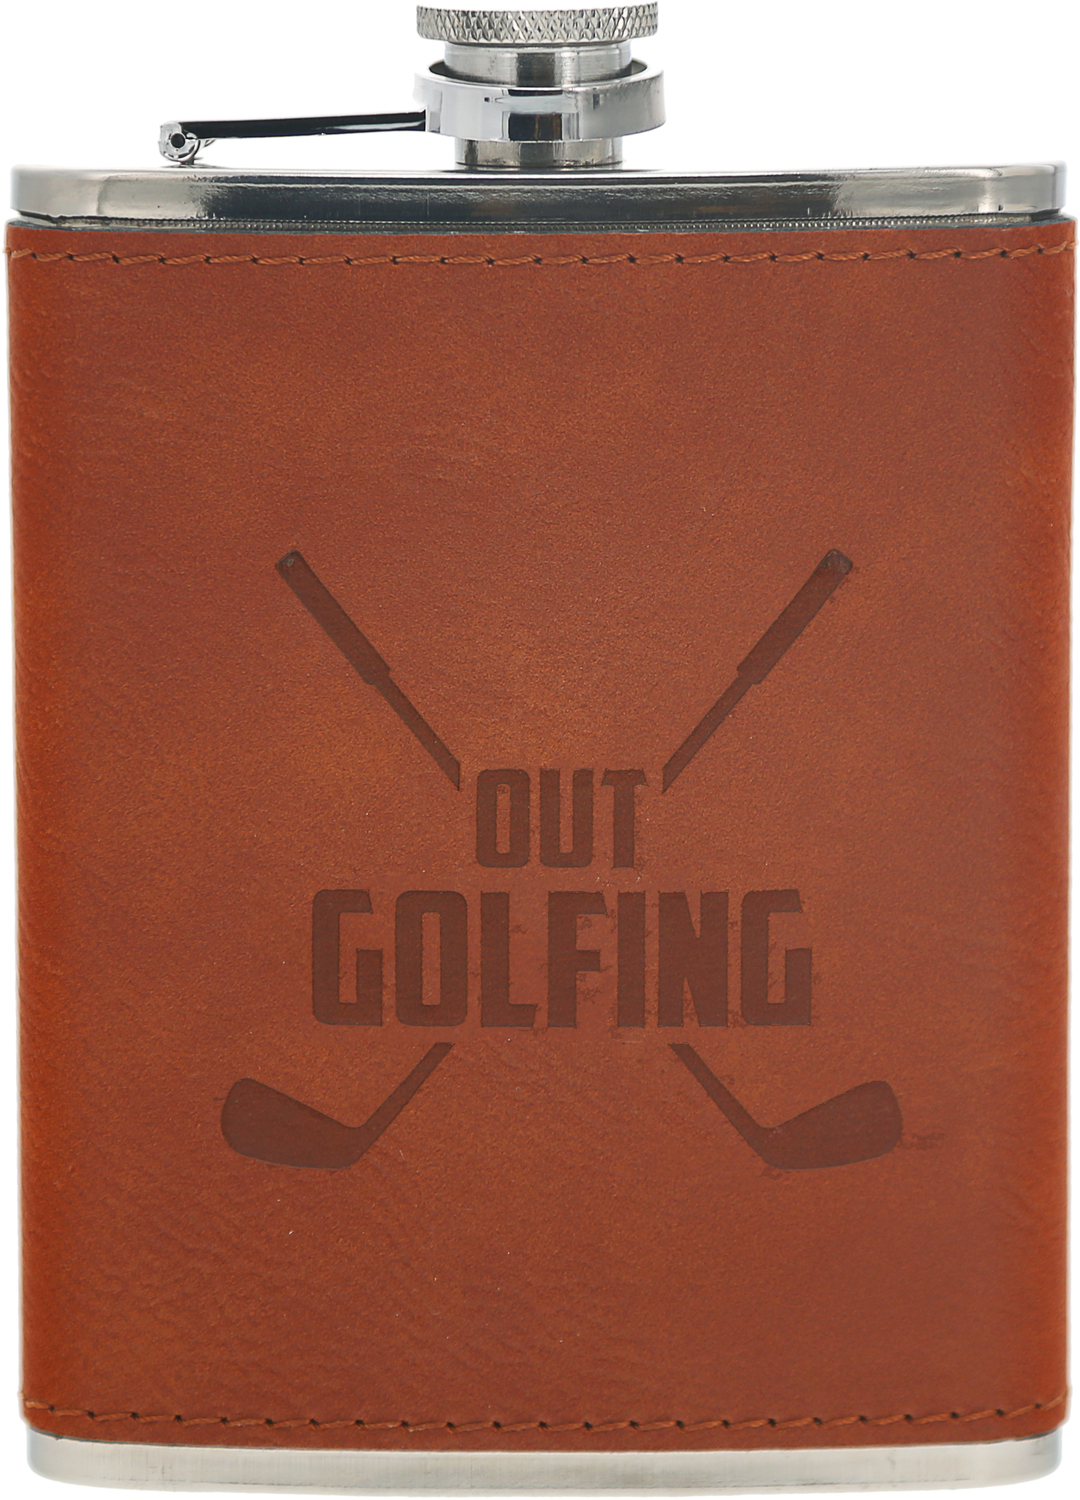 Out Golfing by Man Out - Out Golfing - PU Leather & Stainless Steel 8 oz Flask